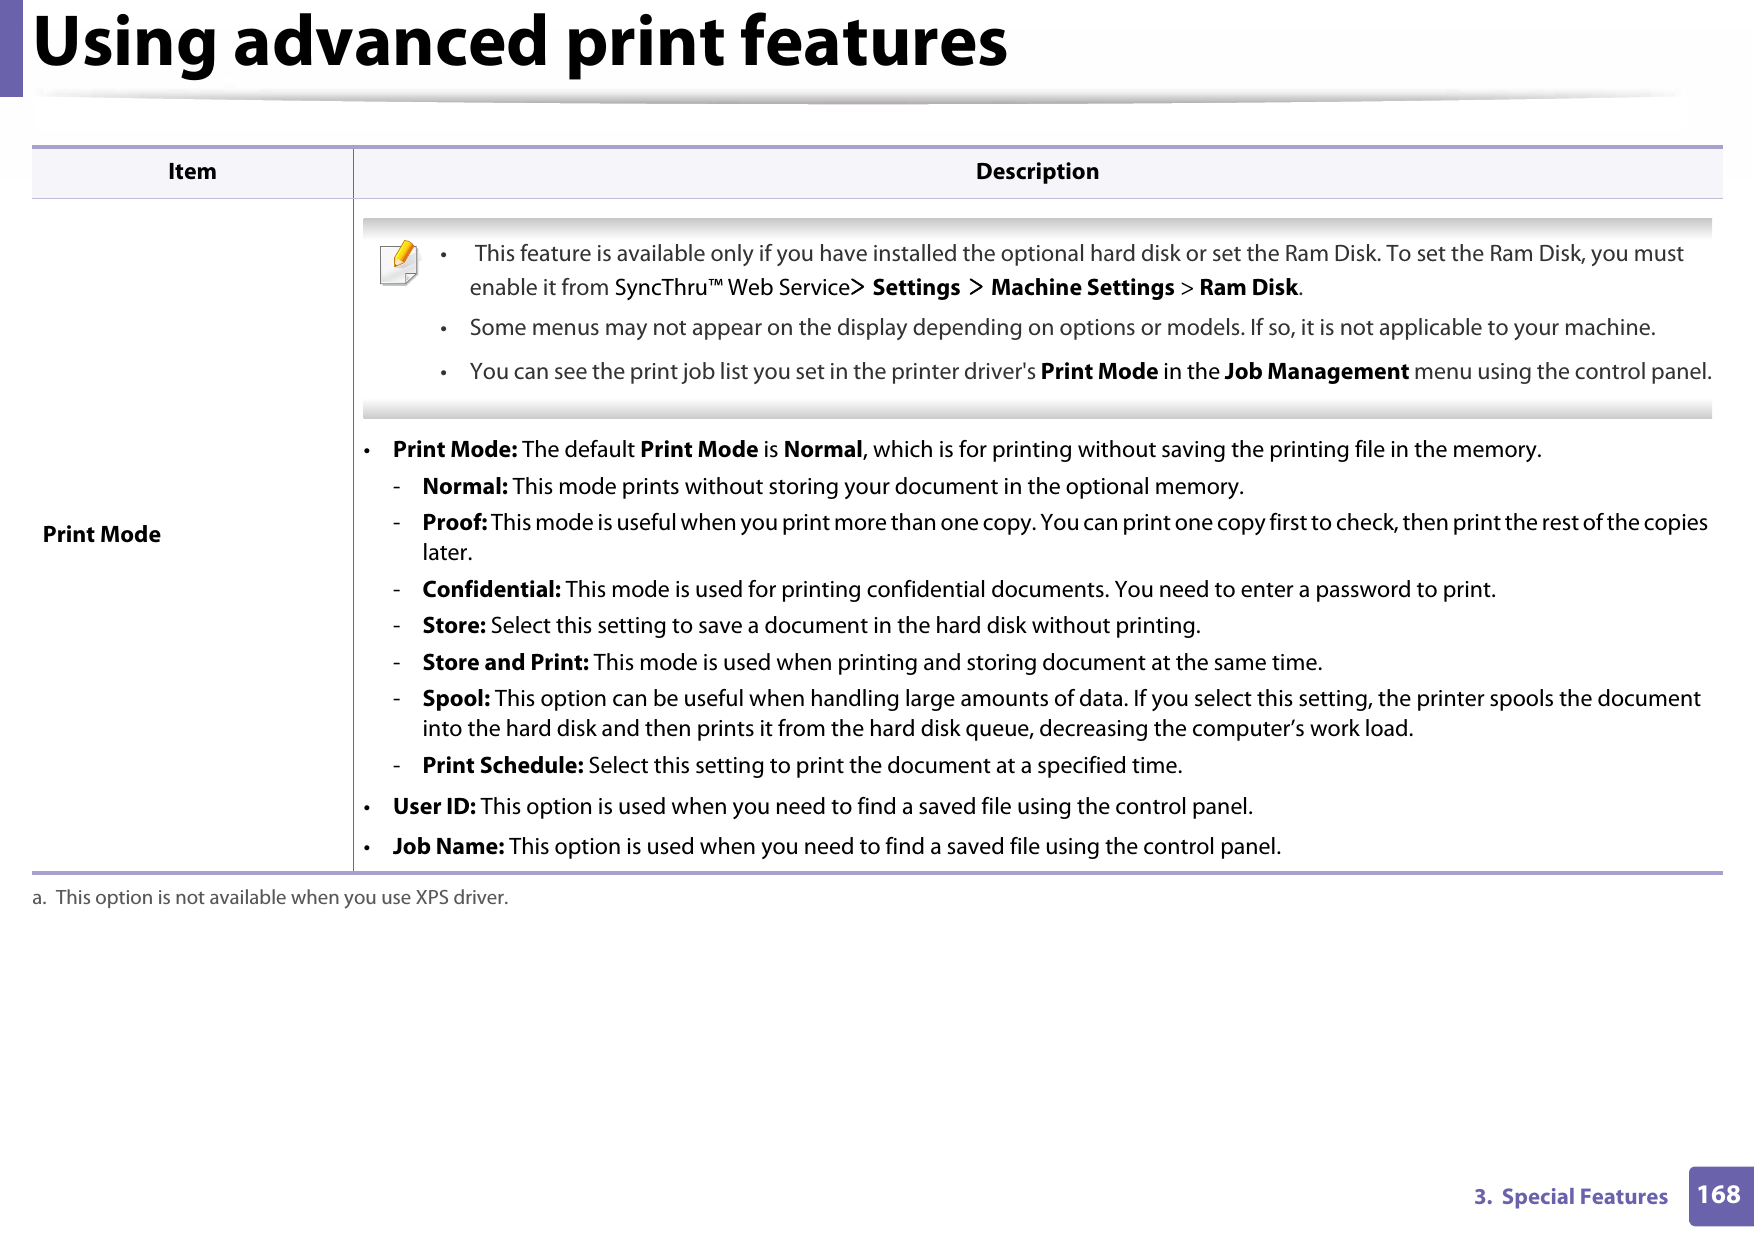 Using advanced print features1683.  Special Features Print Mode •  This feature is available only if you have installed the optional hard disk or set the Ram Disk. To set the Ram Disk, you must enable it from SyncThru™ Web Service&gt; Settings &gt; Machine Settings &gt; Ram Disk.• Some menus may not appear on the display depending on options or models. If so, it is not applicable to your machine.• You can see the print job list you set in the printer driver&apos;s Print Mode in the Job Management menu using the control panel. •Print Mode: The default Print Mode is Normal, which is for printing without saving the printing file in the memory. -Normal: This mode prints without storing your document in the optional memory. -Proof: This mode is useful when you print more than one copy. You can print one copy first to check, then print the rest of the copies later. -Confidential: This mode is used for printing confidential documents. You need to enter a password to print. -Store: Select this setting to save a document in the hard disk without printing. -Store and Print: This mode is used when printing and storing document at the same time.-Spool: This option can be useful when handling large amounts of data. If you select this setting, the printer spools the document into the hard disk and then prints it from the hard disk queue, decreasing the computer’s work load.-Print Schedule: Select this setting to print the document at a specified time.•User ID: This option is used when you need to find a saved file using the control panel. •Job Name: This option is used when you need to find a saved file using the control panel. a. This option is not available when you use XPS driver.Item Description